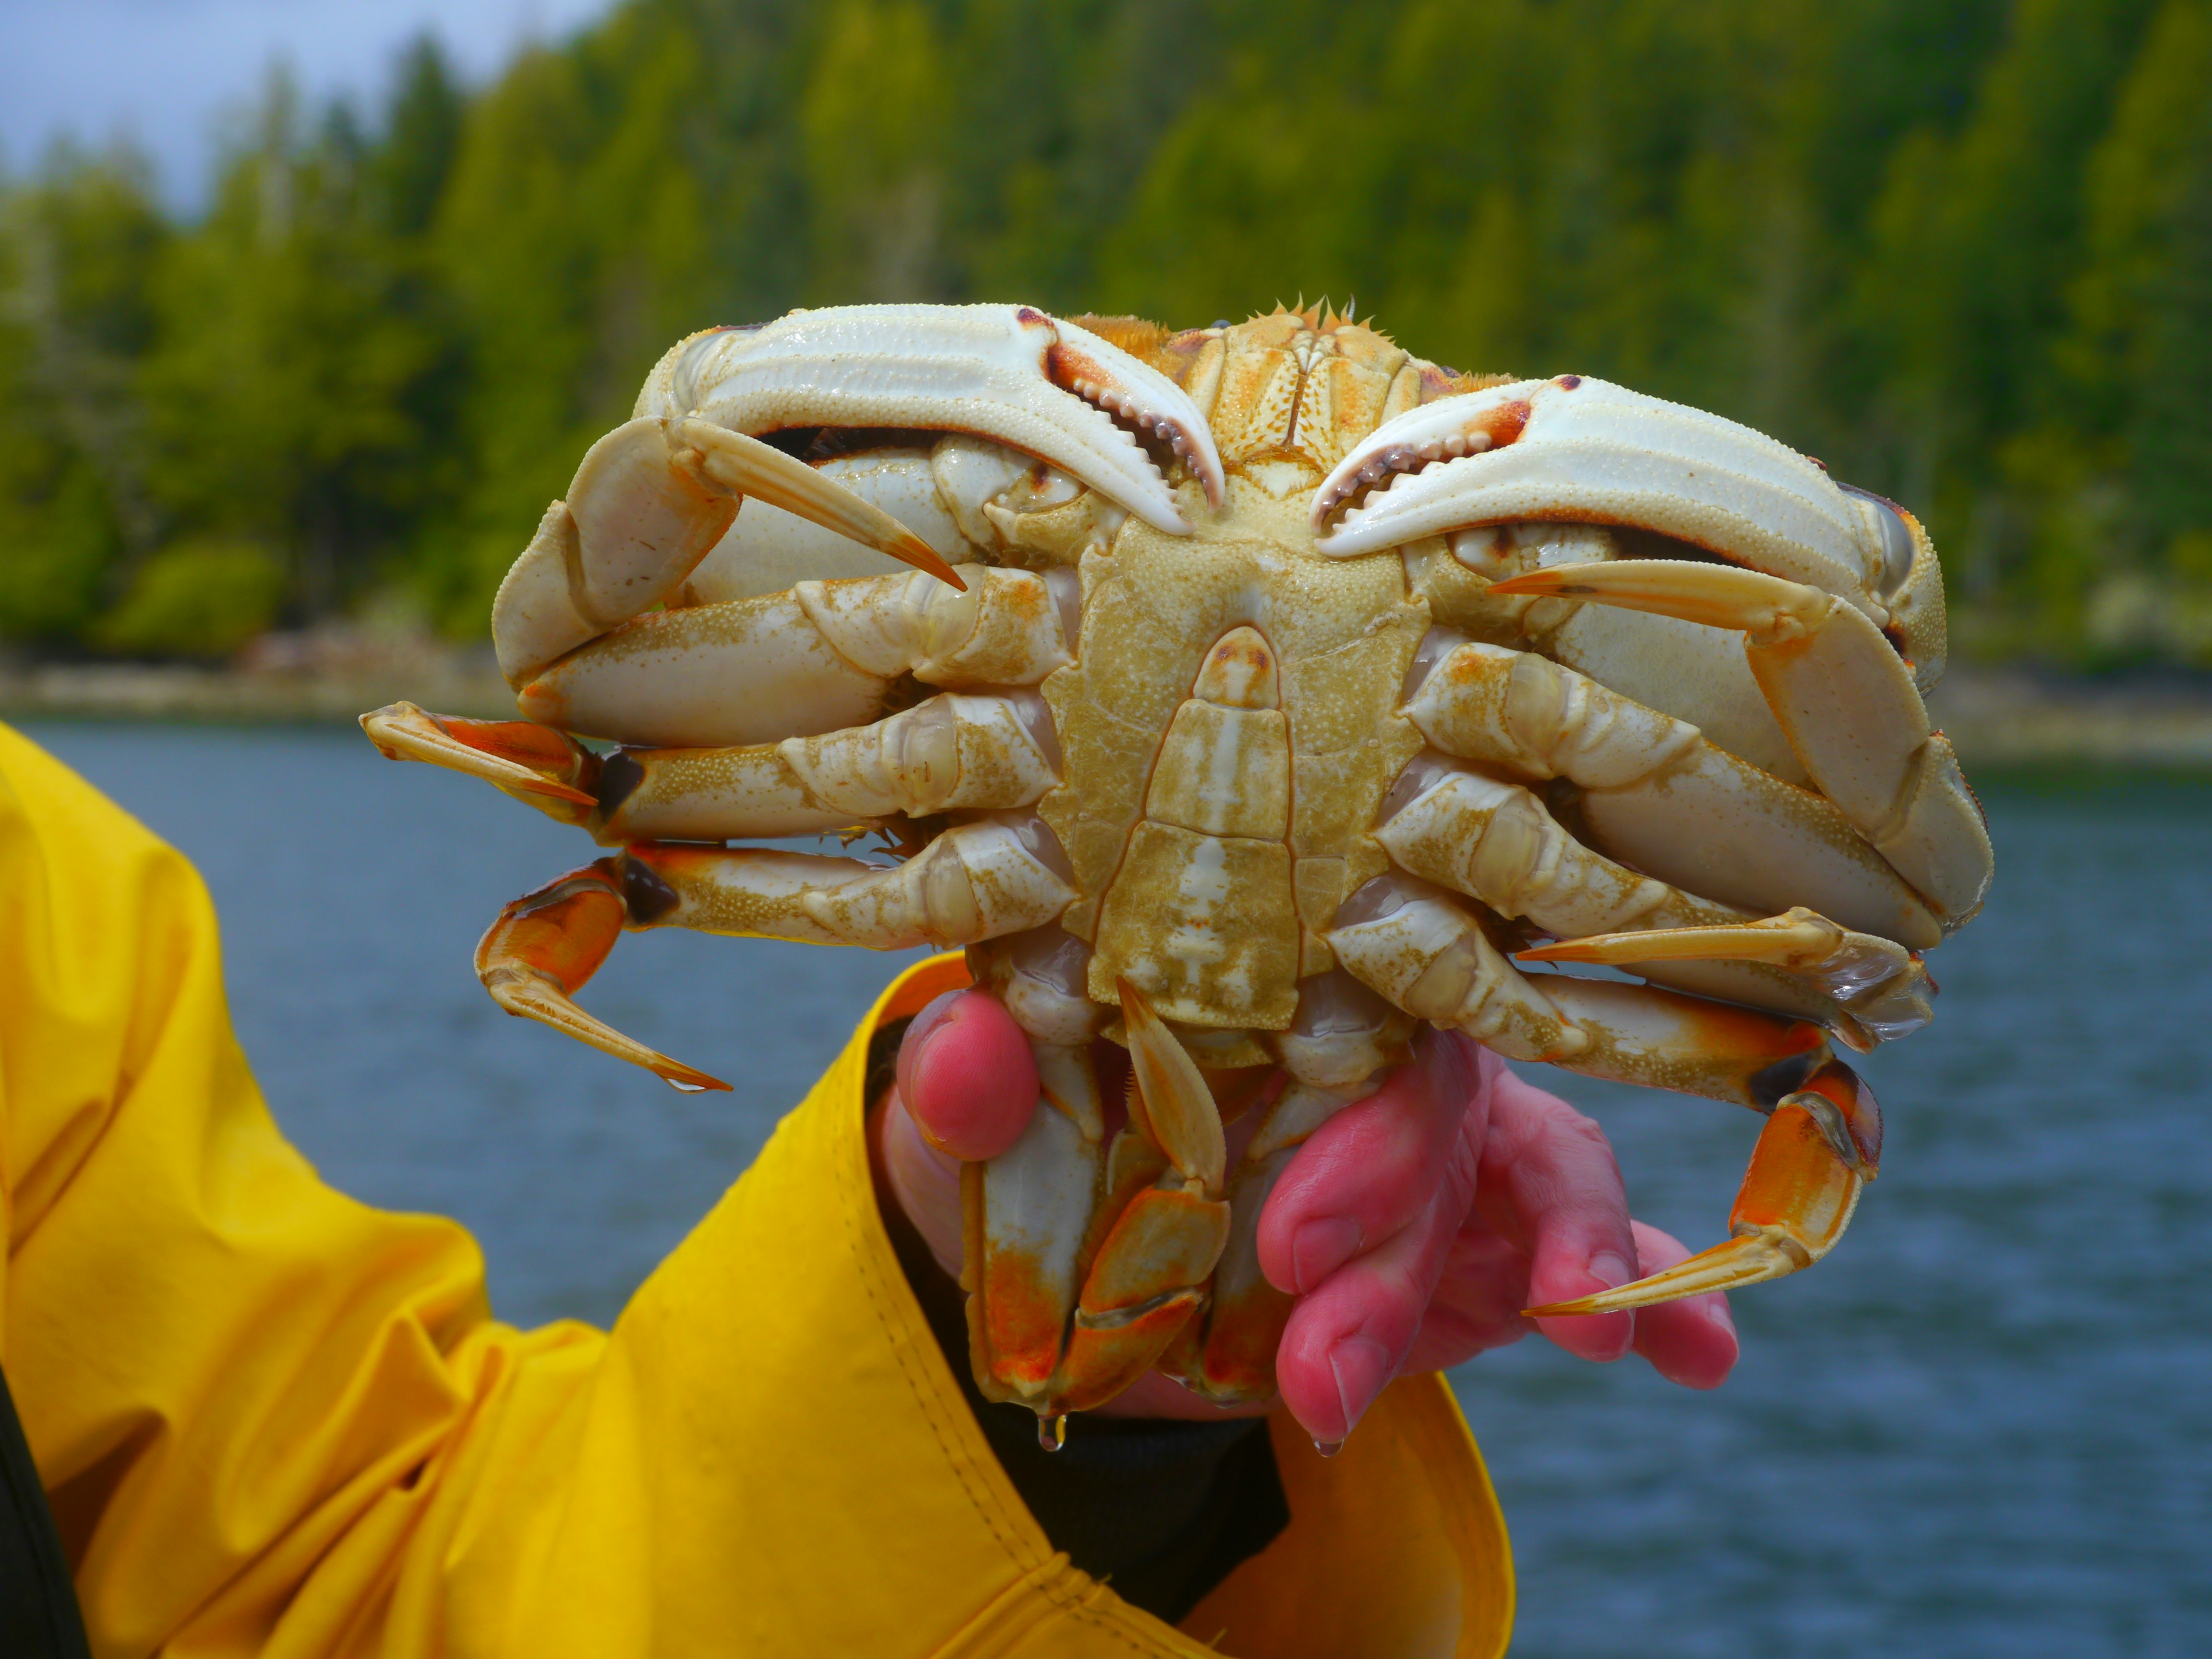 A hand, the fingers bright red from cold, holds an enormous crab with orange legs and a white underbody. The arm holding the crab is clad in a bright yellow rain slicker. Blurred in the background is the blue sea and the green, tree-lined shore.